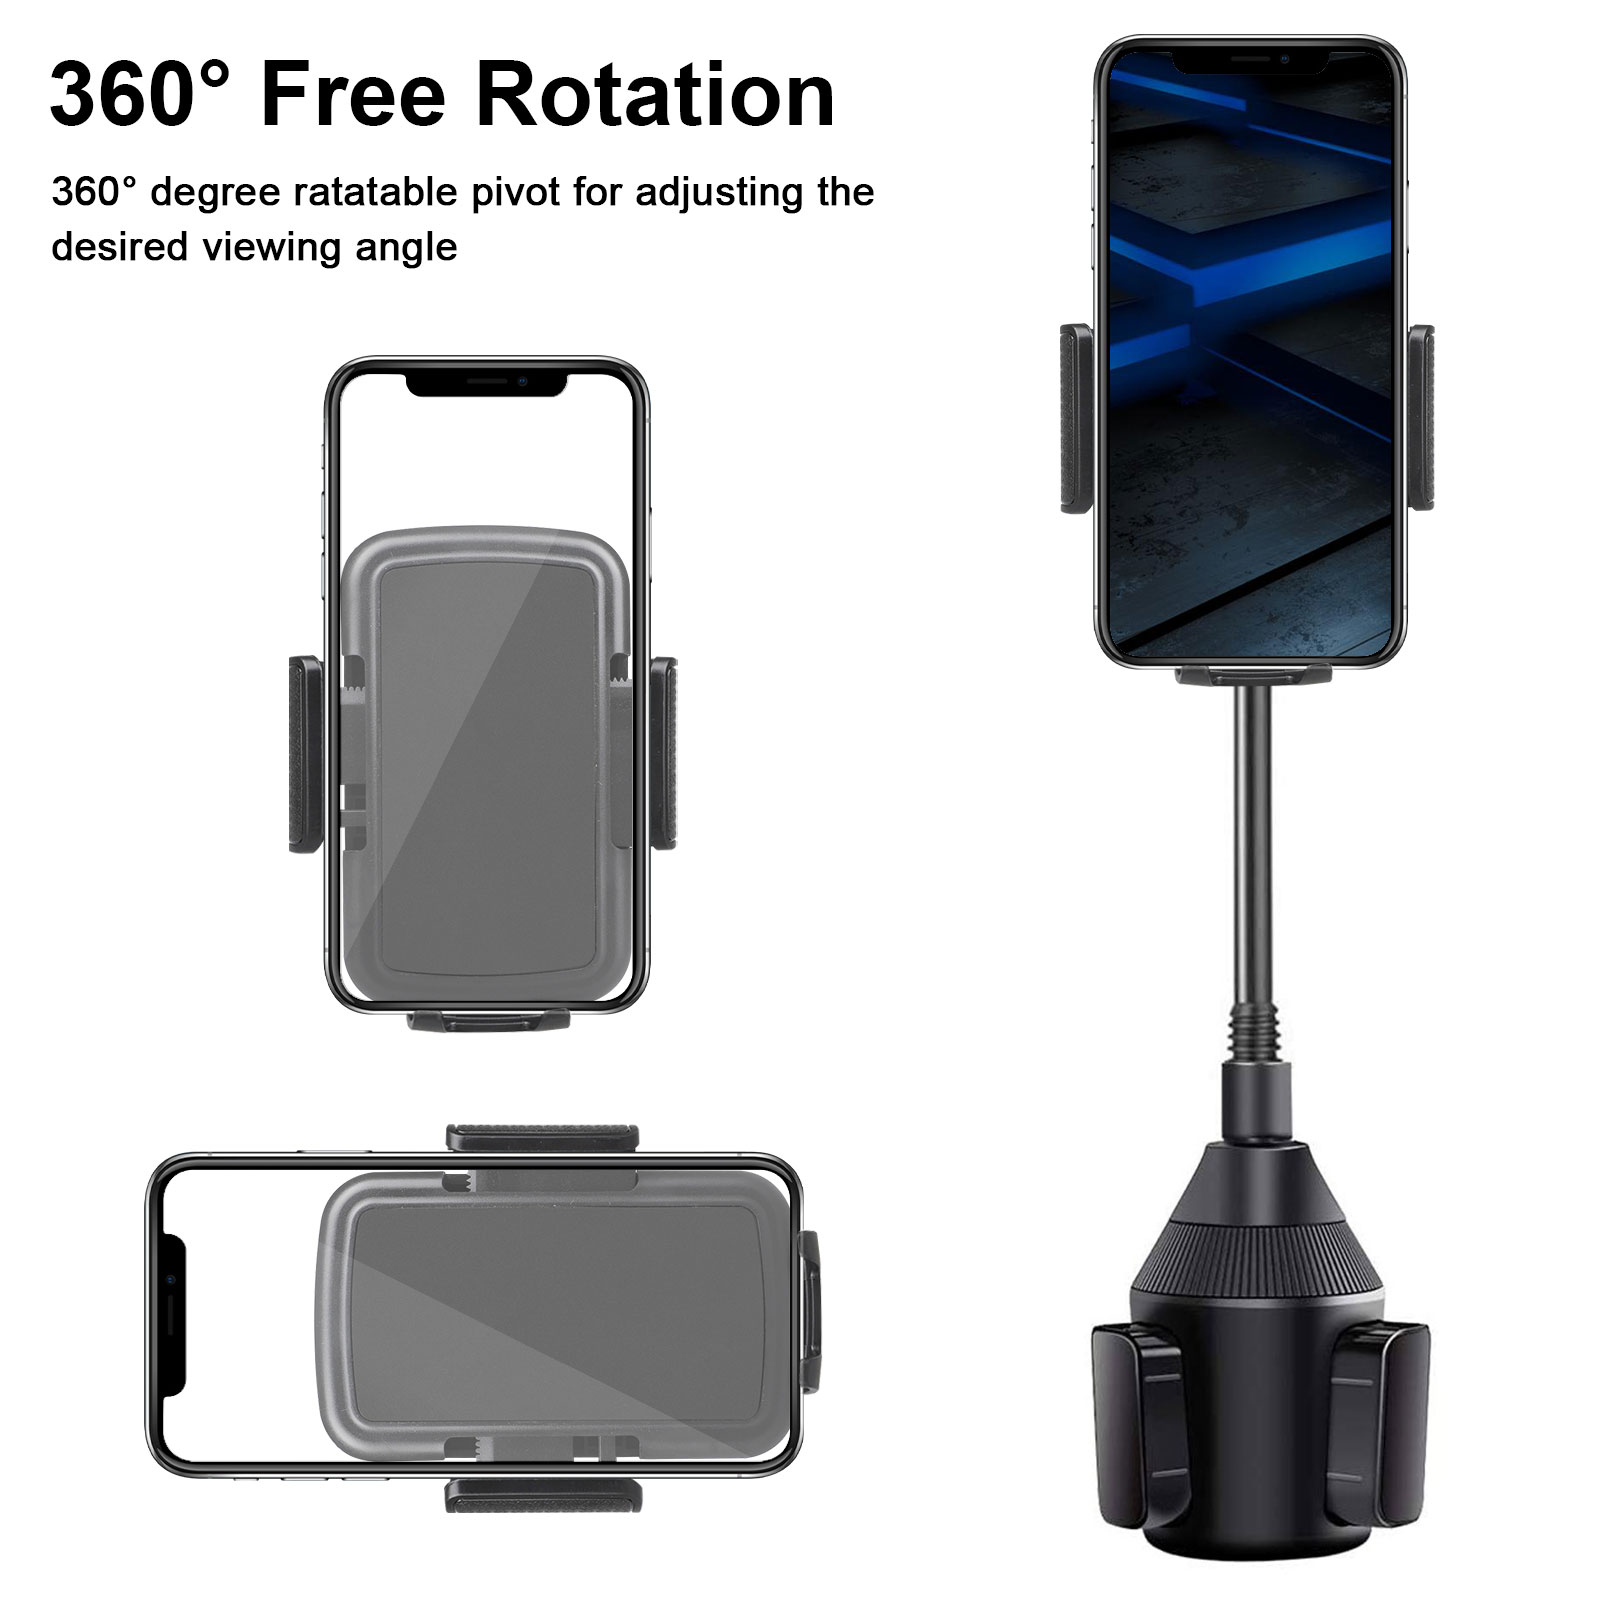 Car Cup Holder Phone Mount, TSV Universal Adjustable Gooseneck Cup Holder Cradle Car Mount 360° Rotatable Fit for iPhone 13 12 11 Pro XS XR Max Plus, Samsung Galaxy S21+ S20 Ultra - image 2 of 11